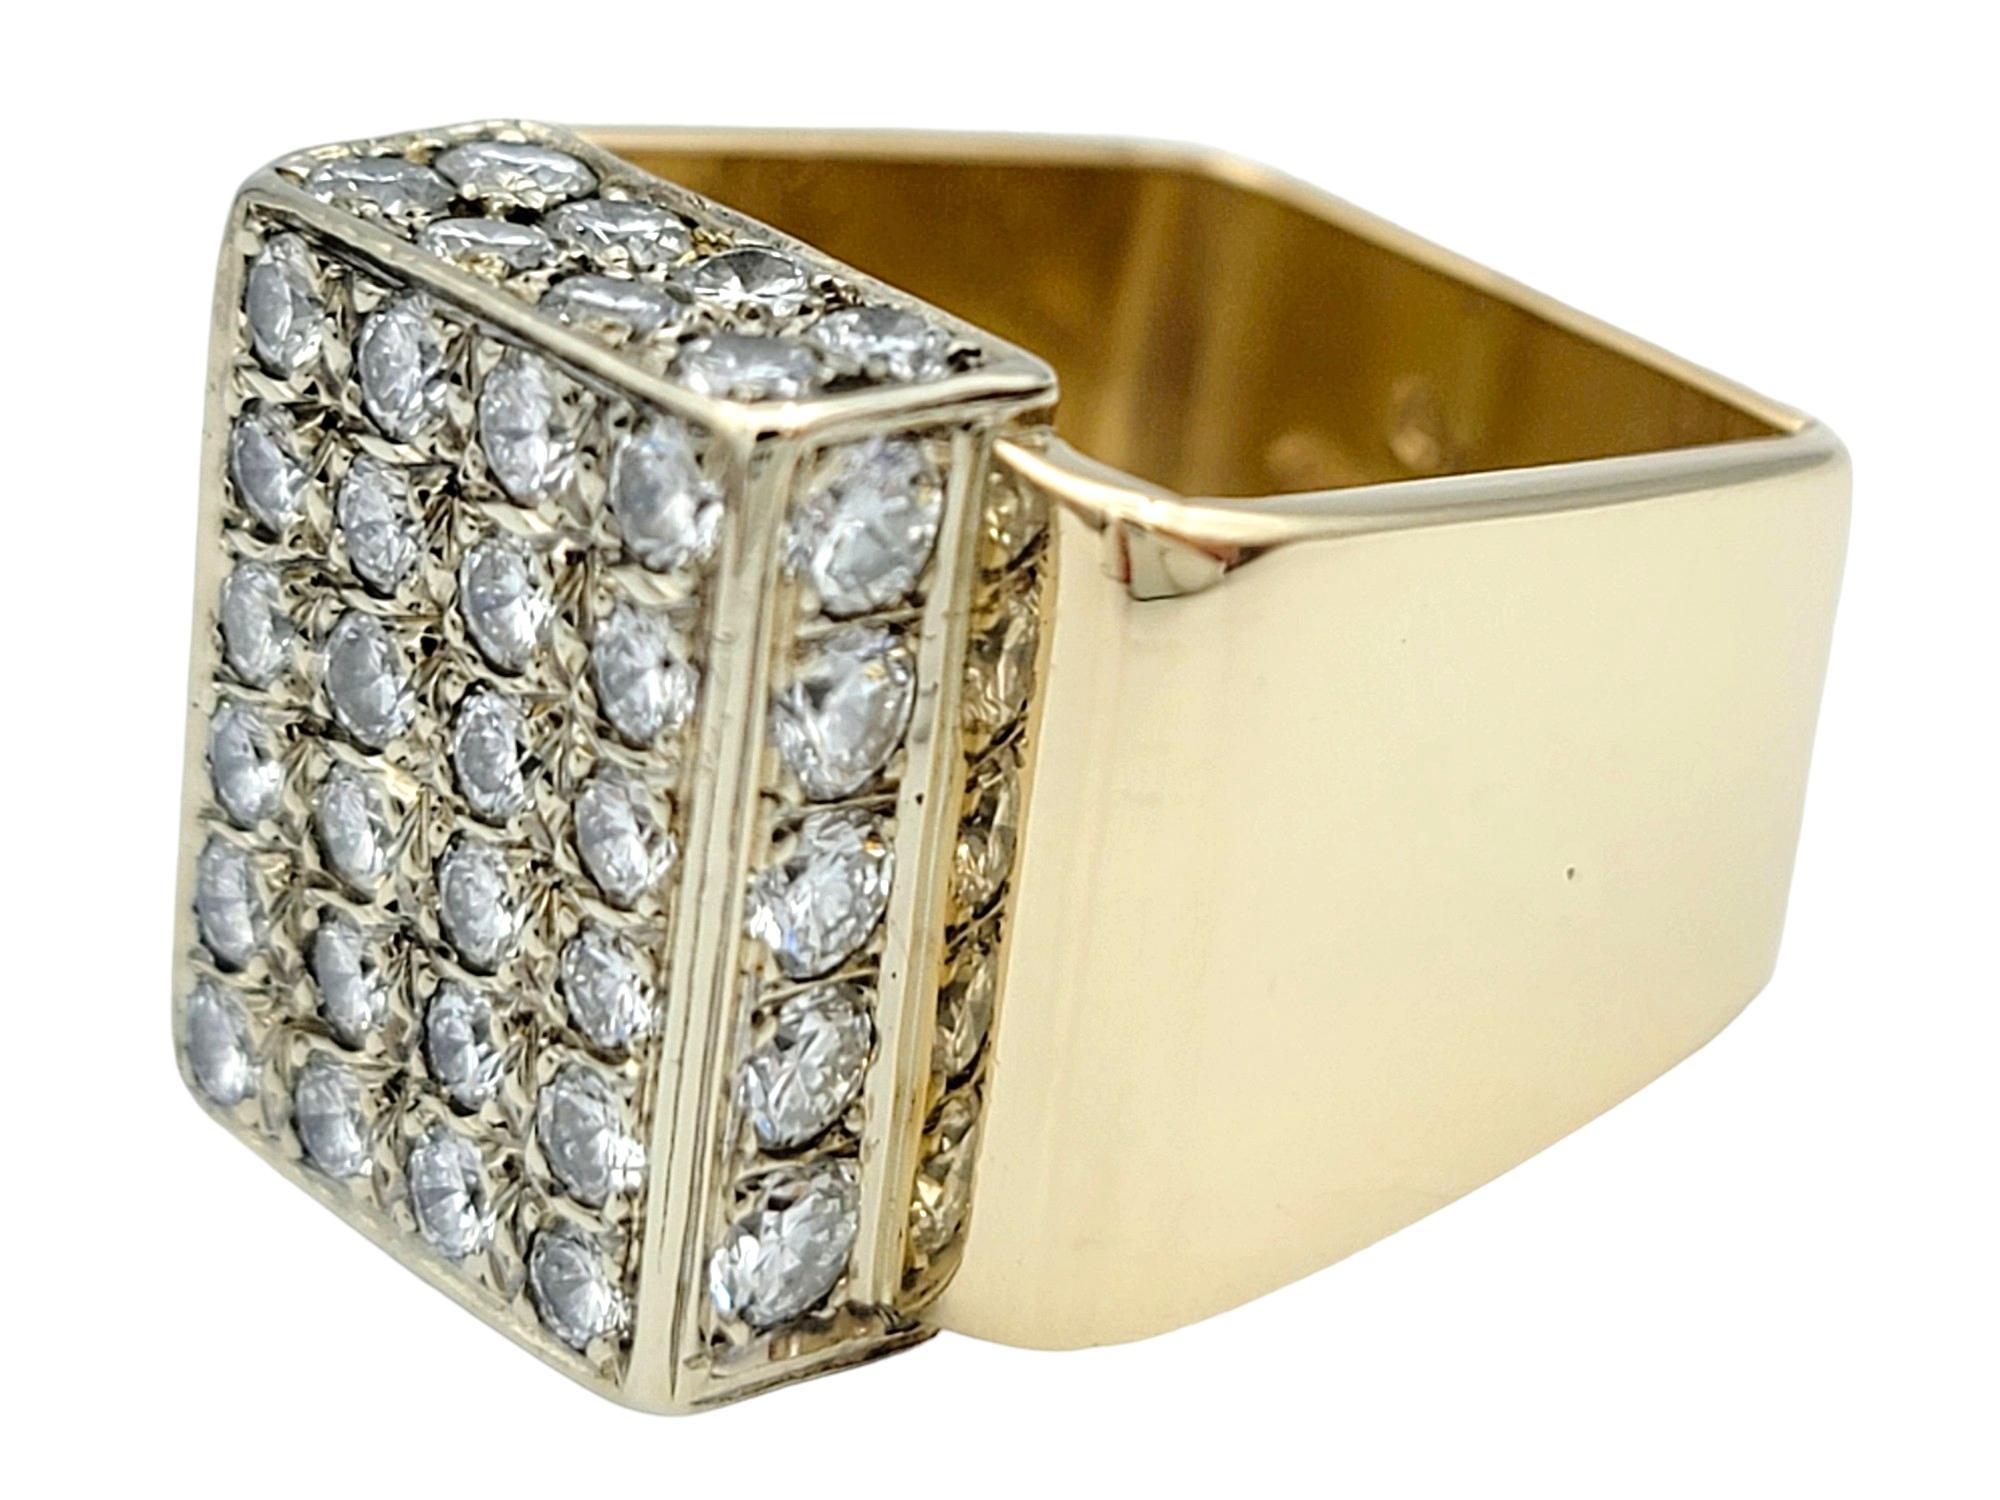 Multi-Row Diamond Cluster Geometric Squared Band Ring in 14 Karat Yellow Gold In Good Condition For Sale In Scottsdale, AZ